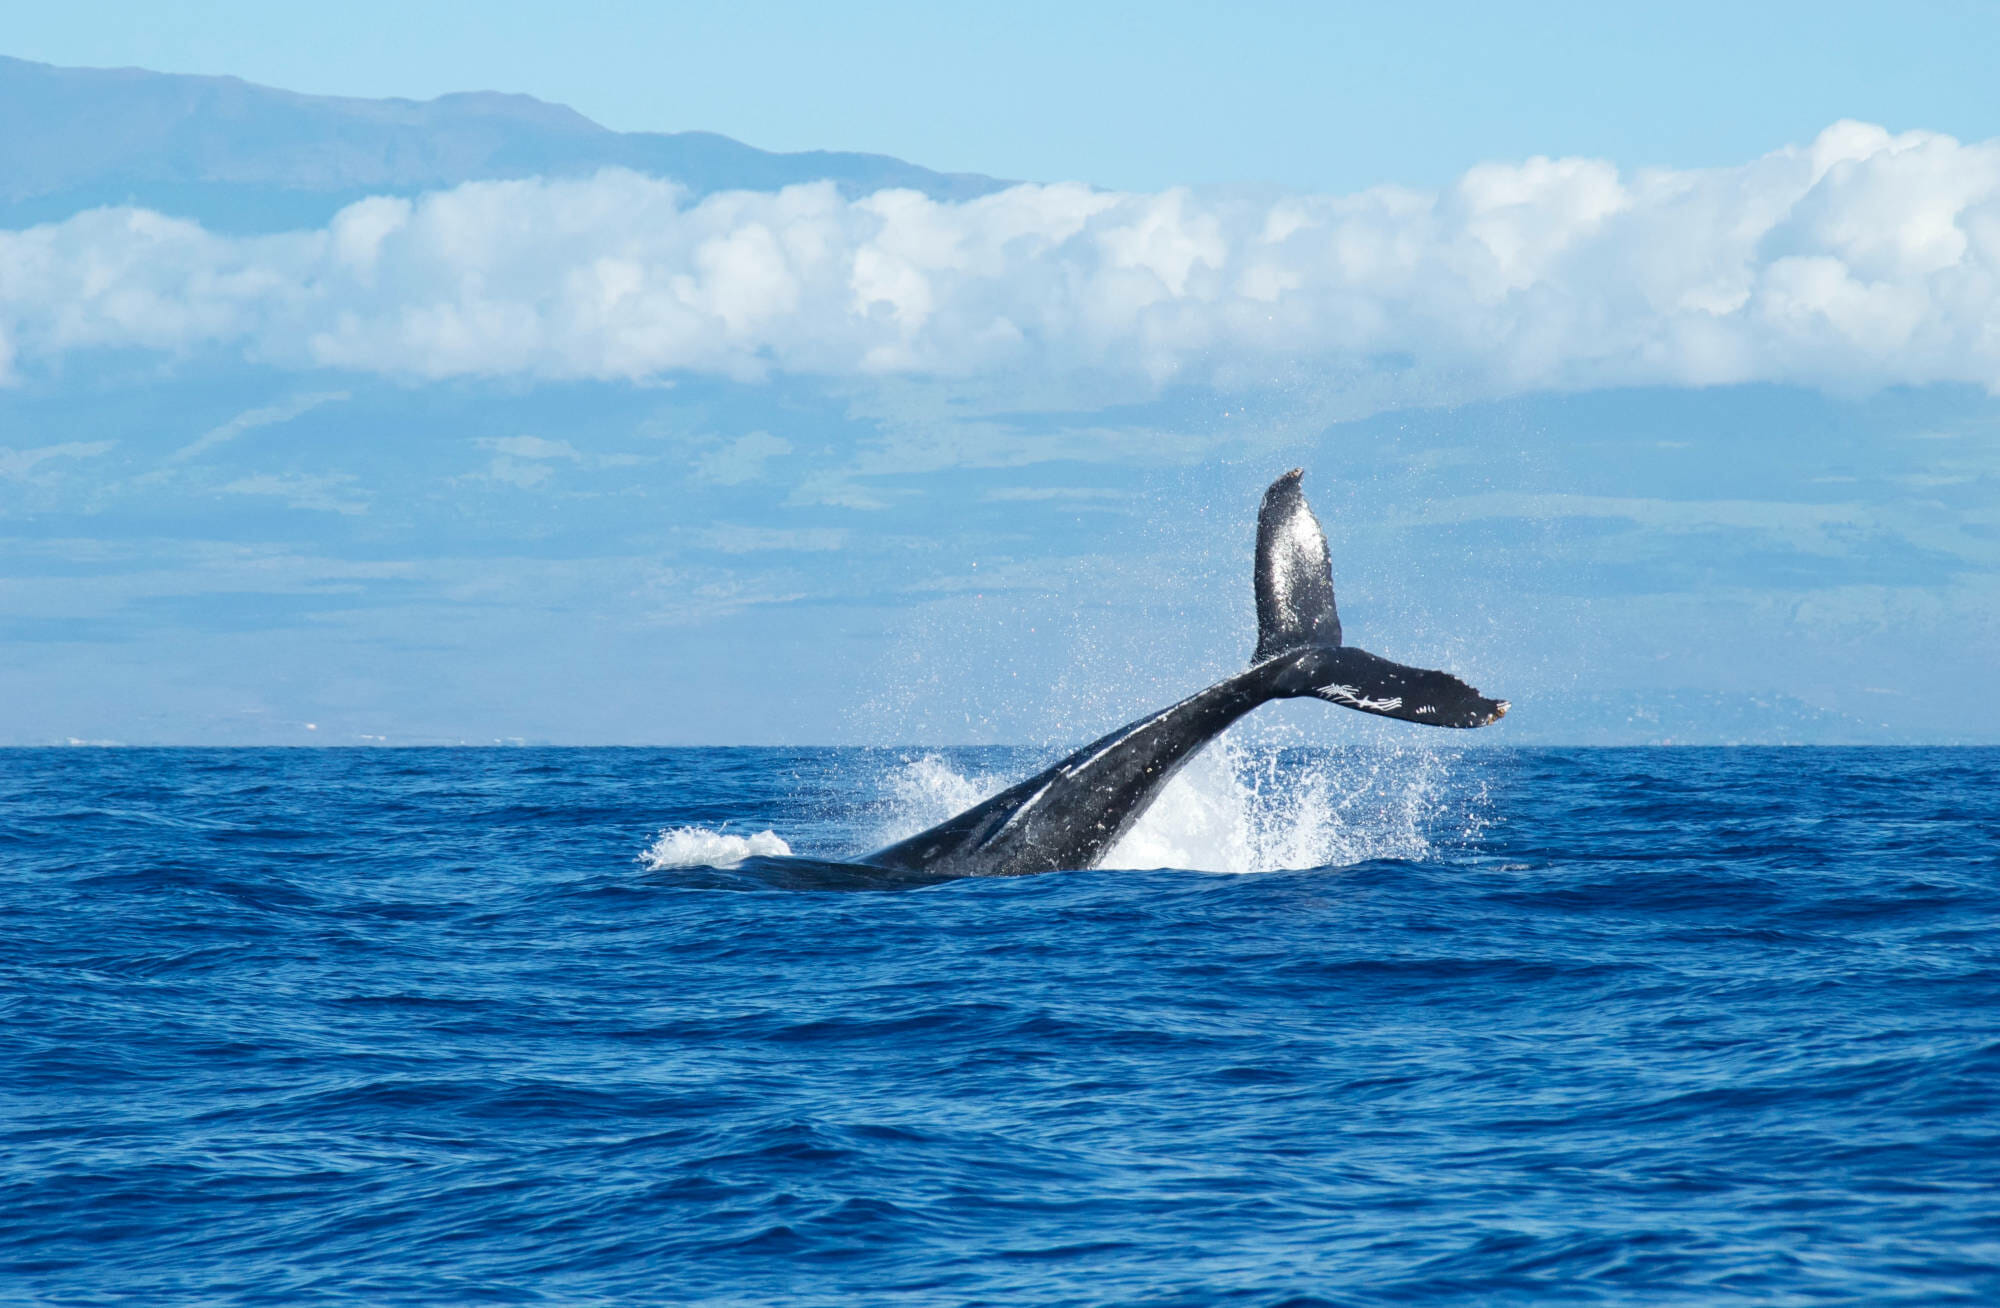 10 Best Maui Whale Watching Tours From Kaanapali to Maalaea